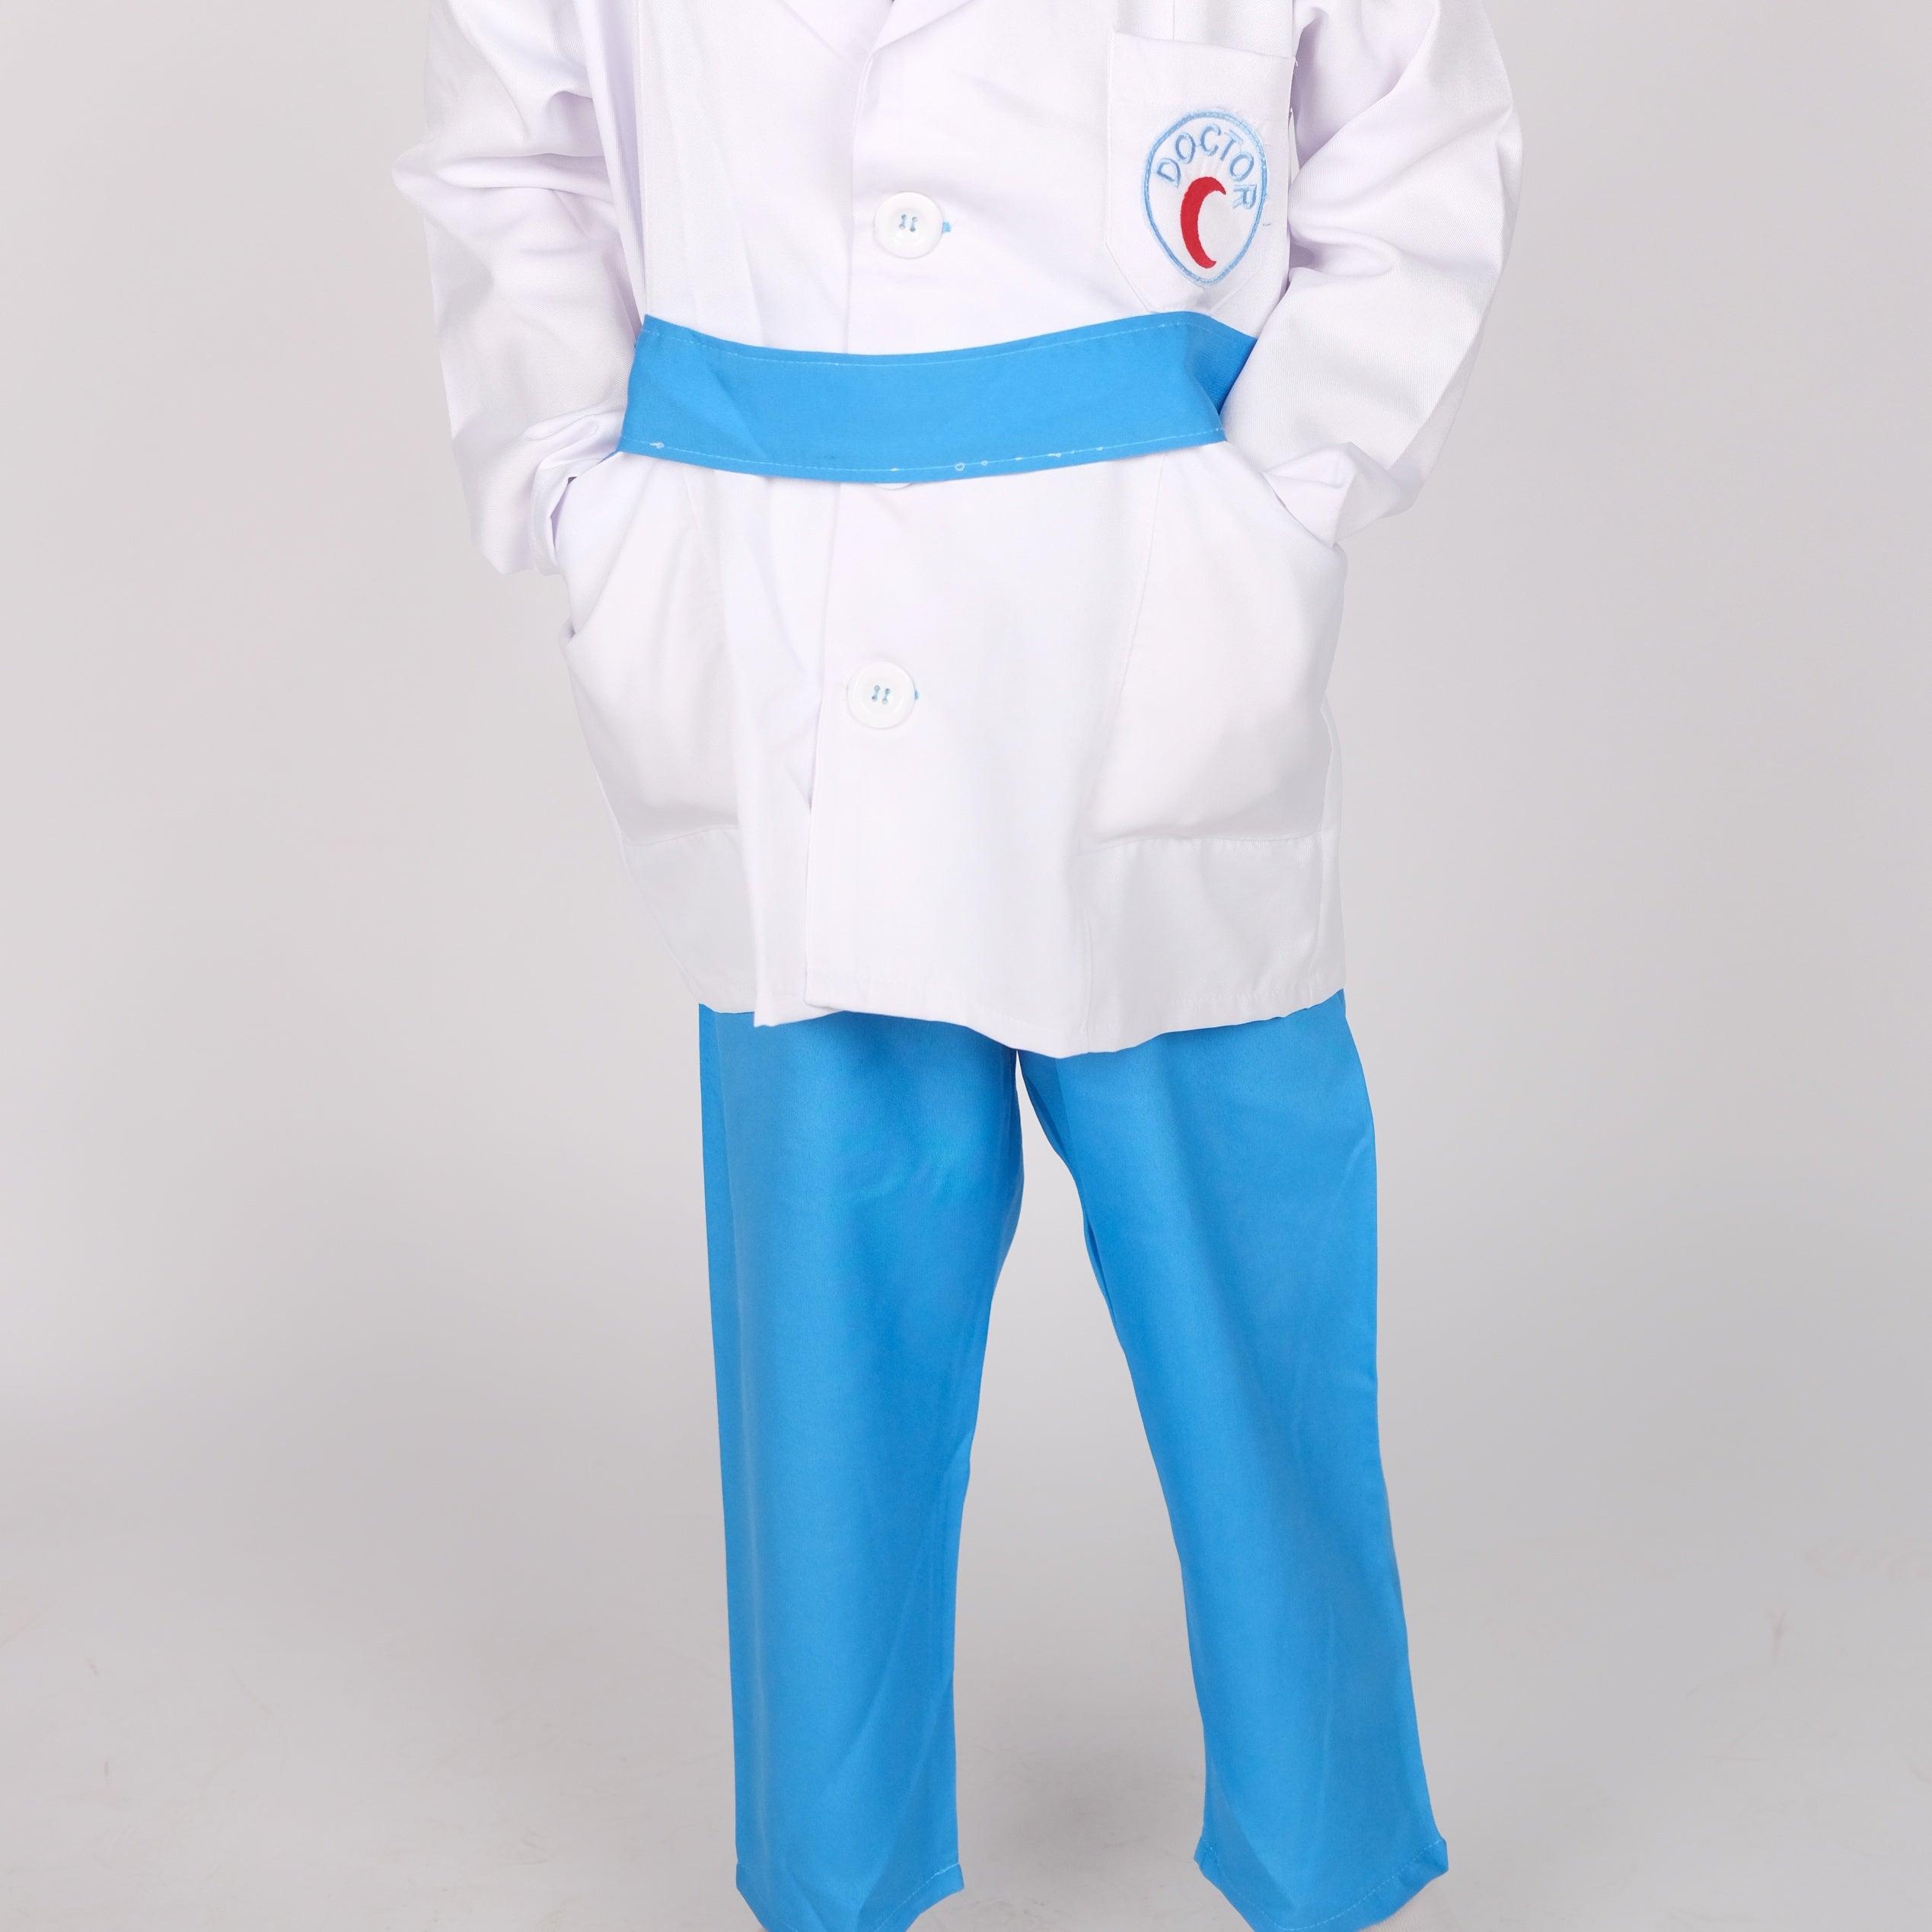 Doctor Costume - Ourkids - The Party Animals